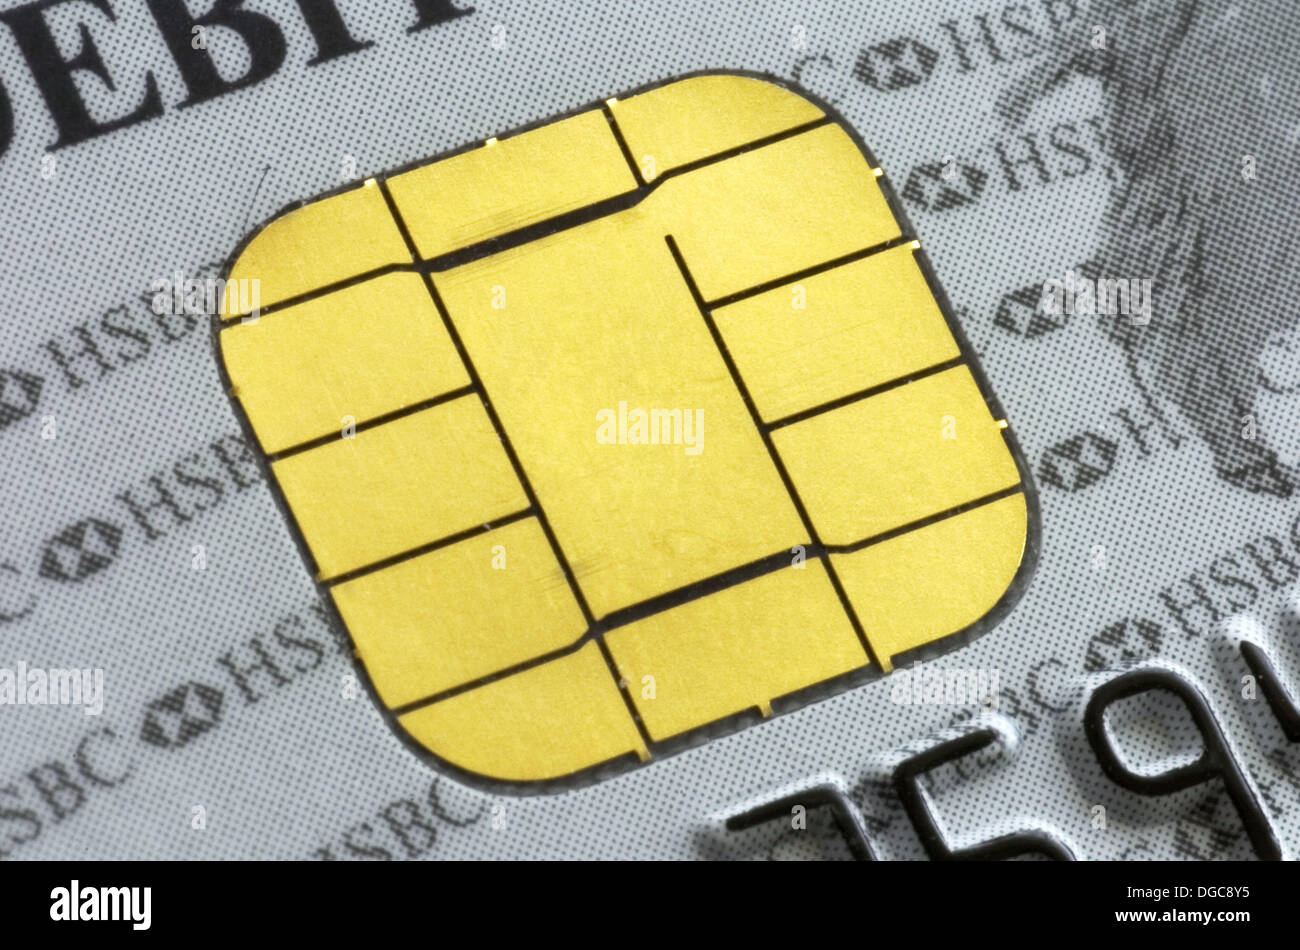 Chip and pin debit card Stock Photo - Alamy